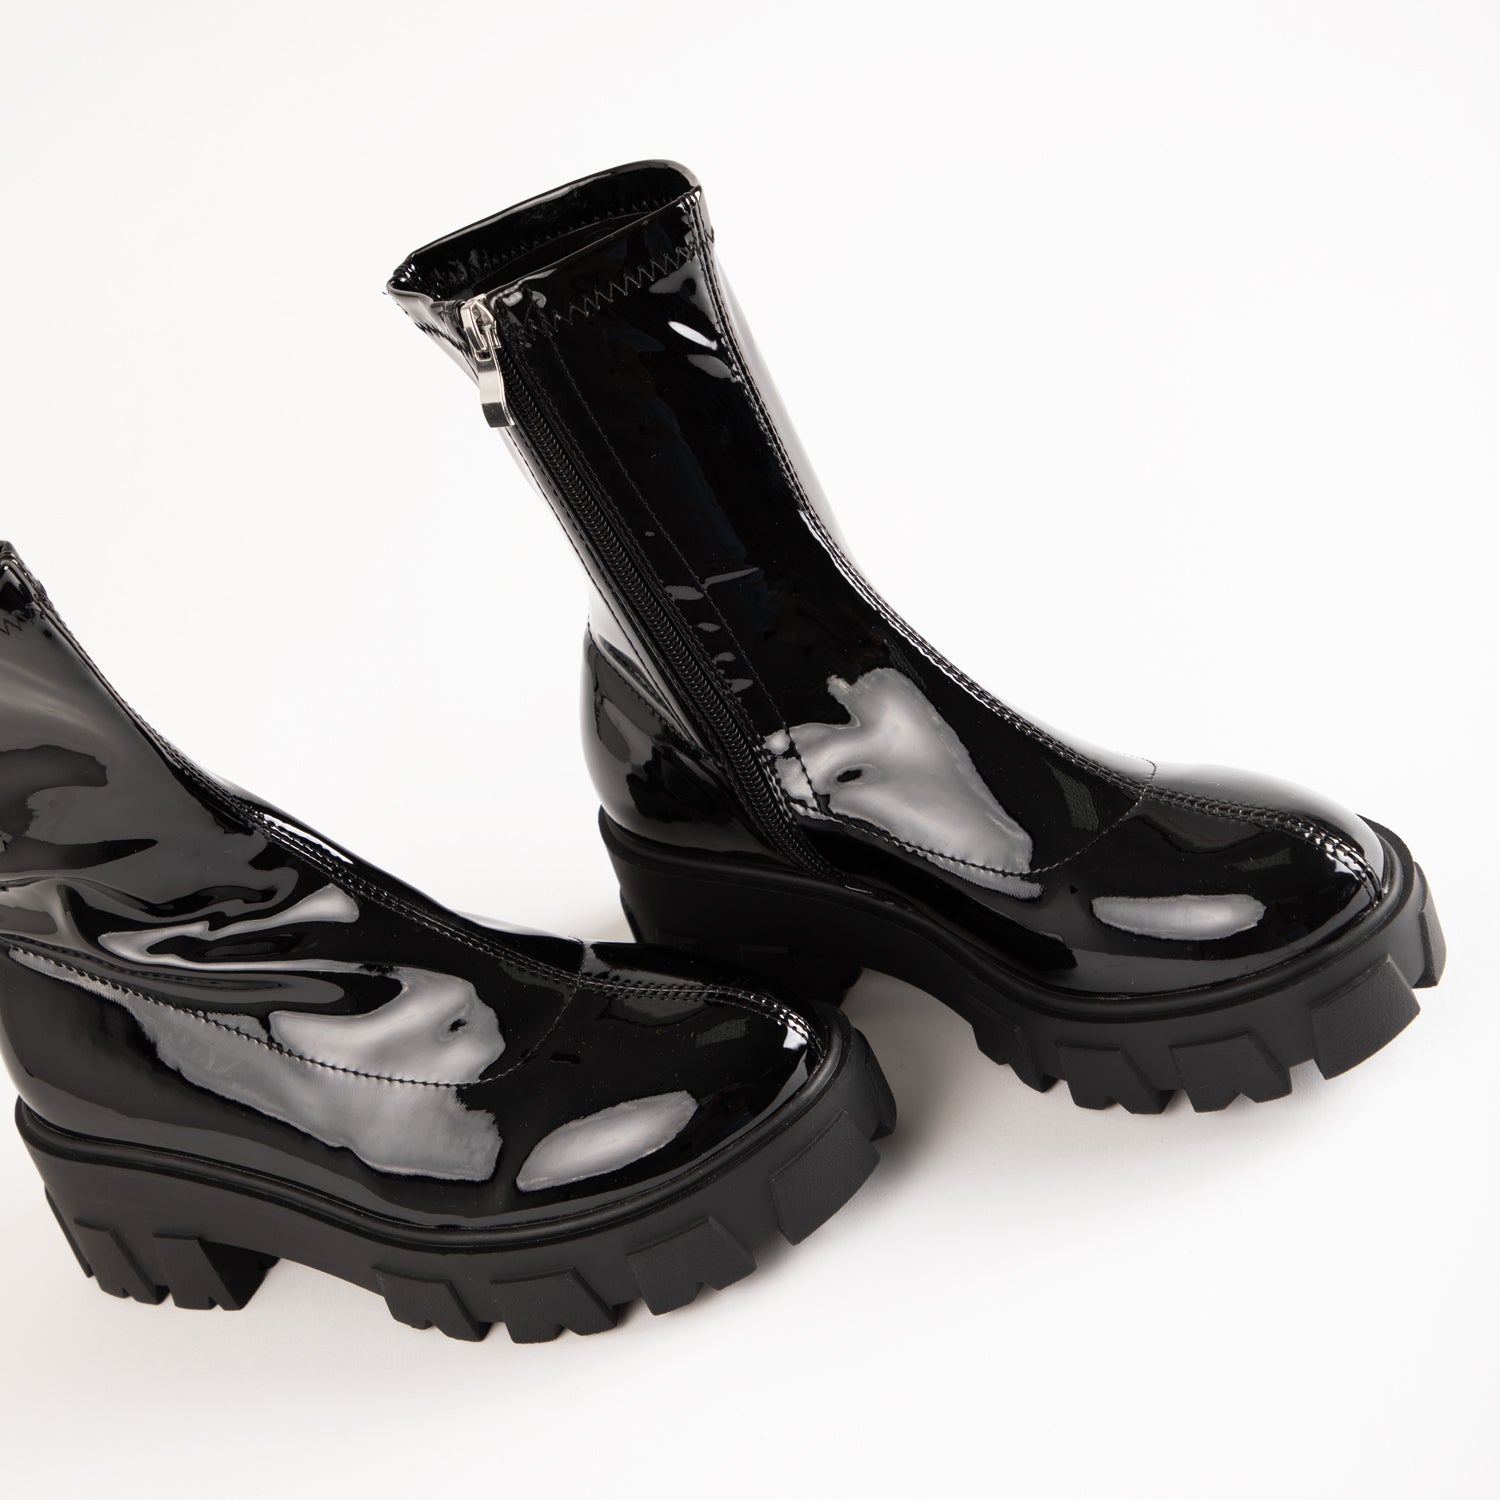 RAID Tackle Chunky Ankle Boot in Black Patent